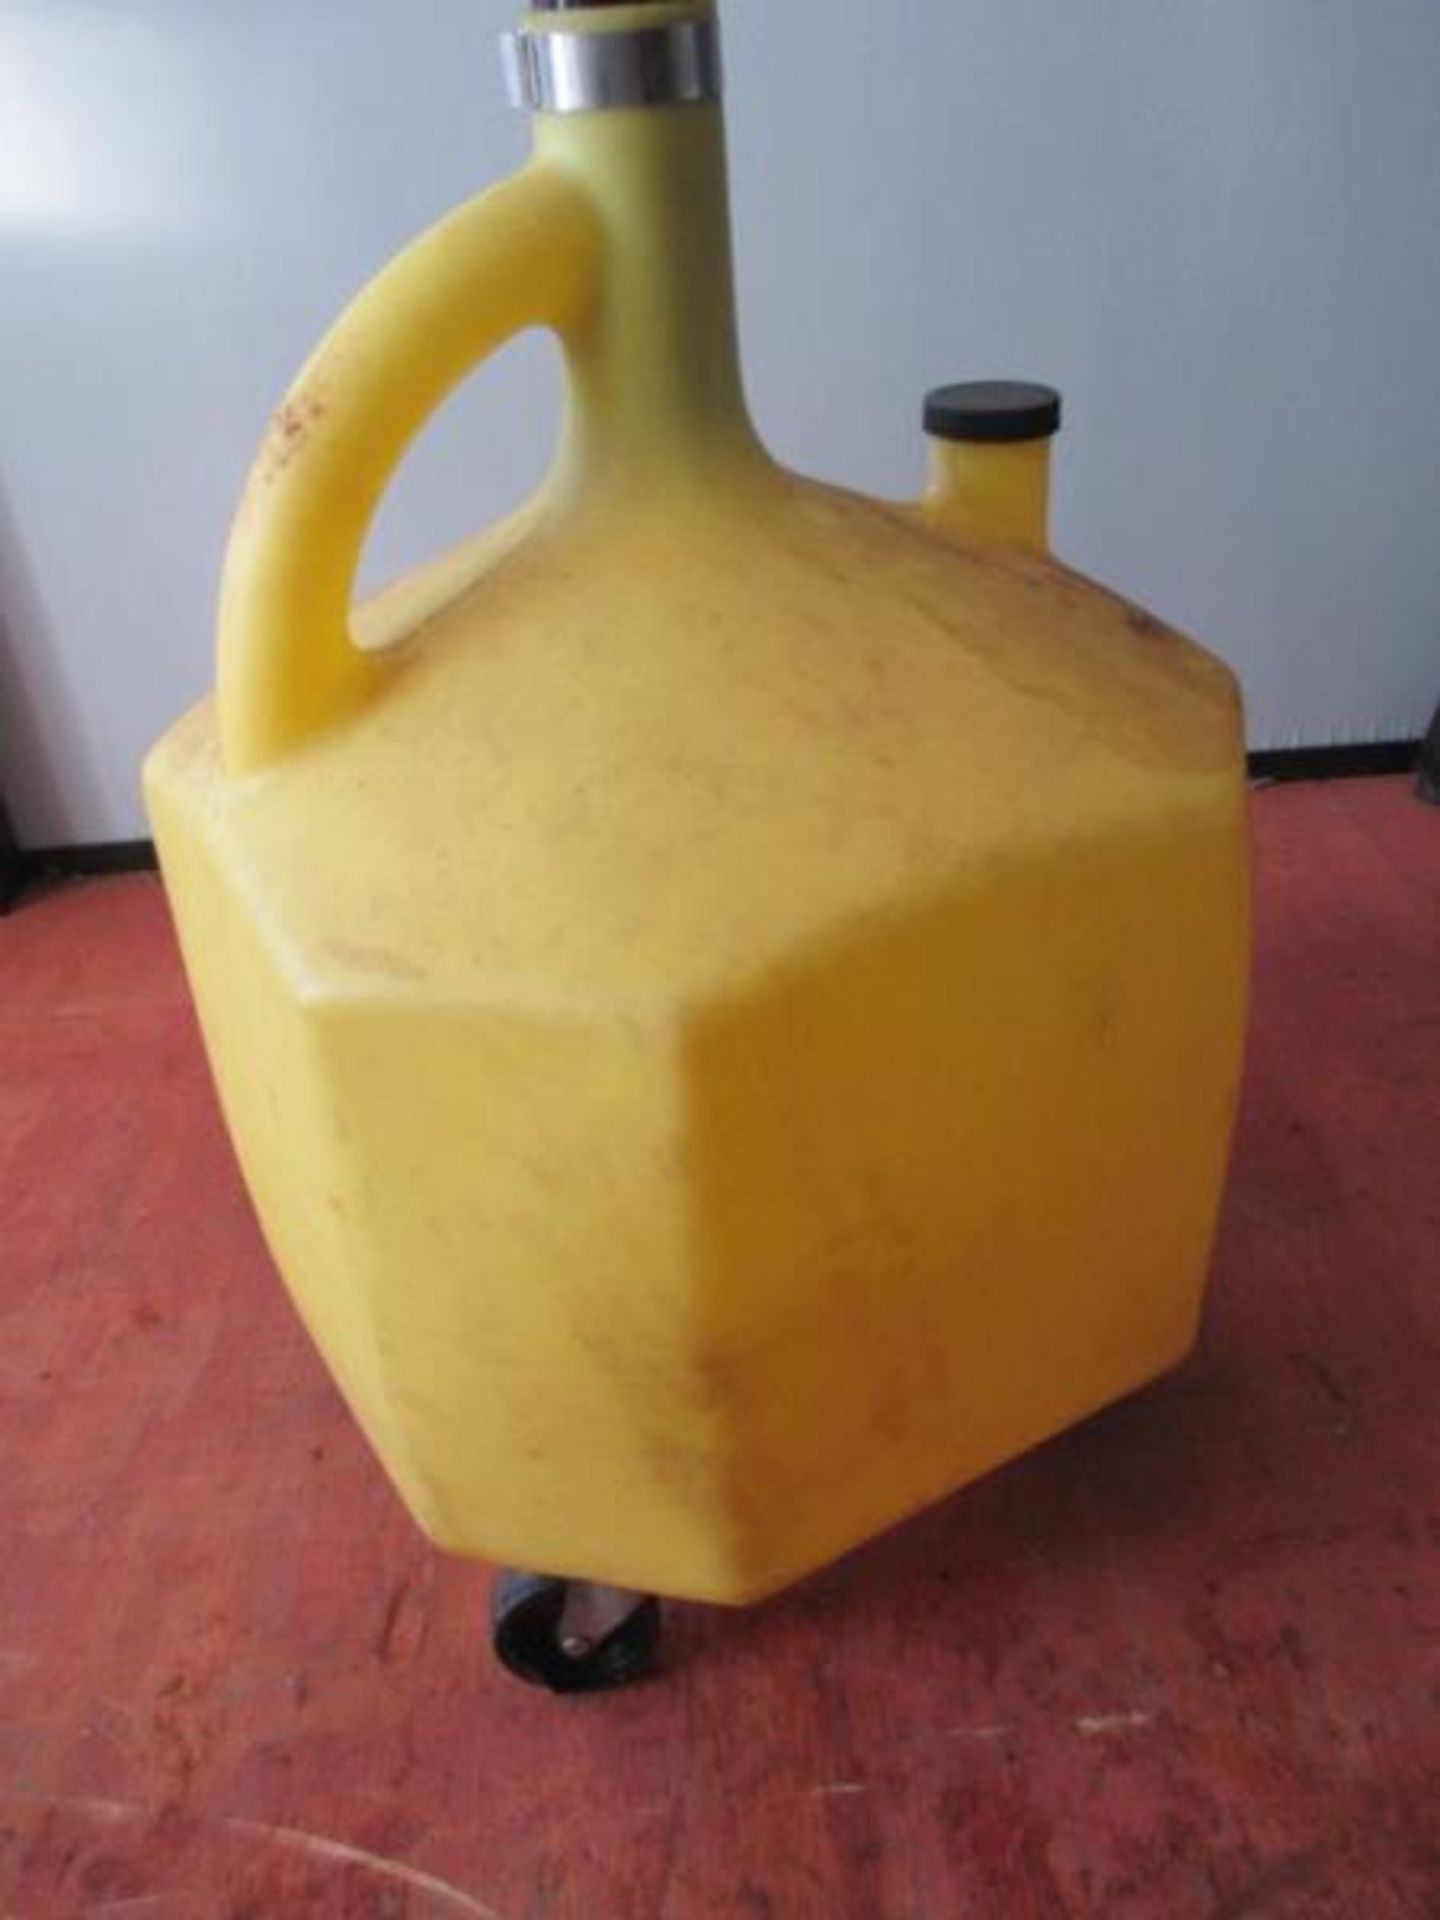 Direct Catch Oil Drainers w/ Yellow Tank on Casters, Adjustable Height Casters, Adjustable Height - Image 3 of 3